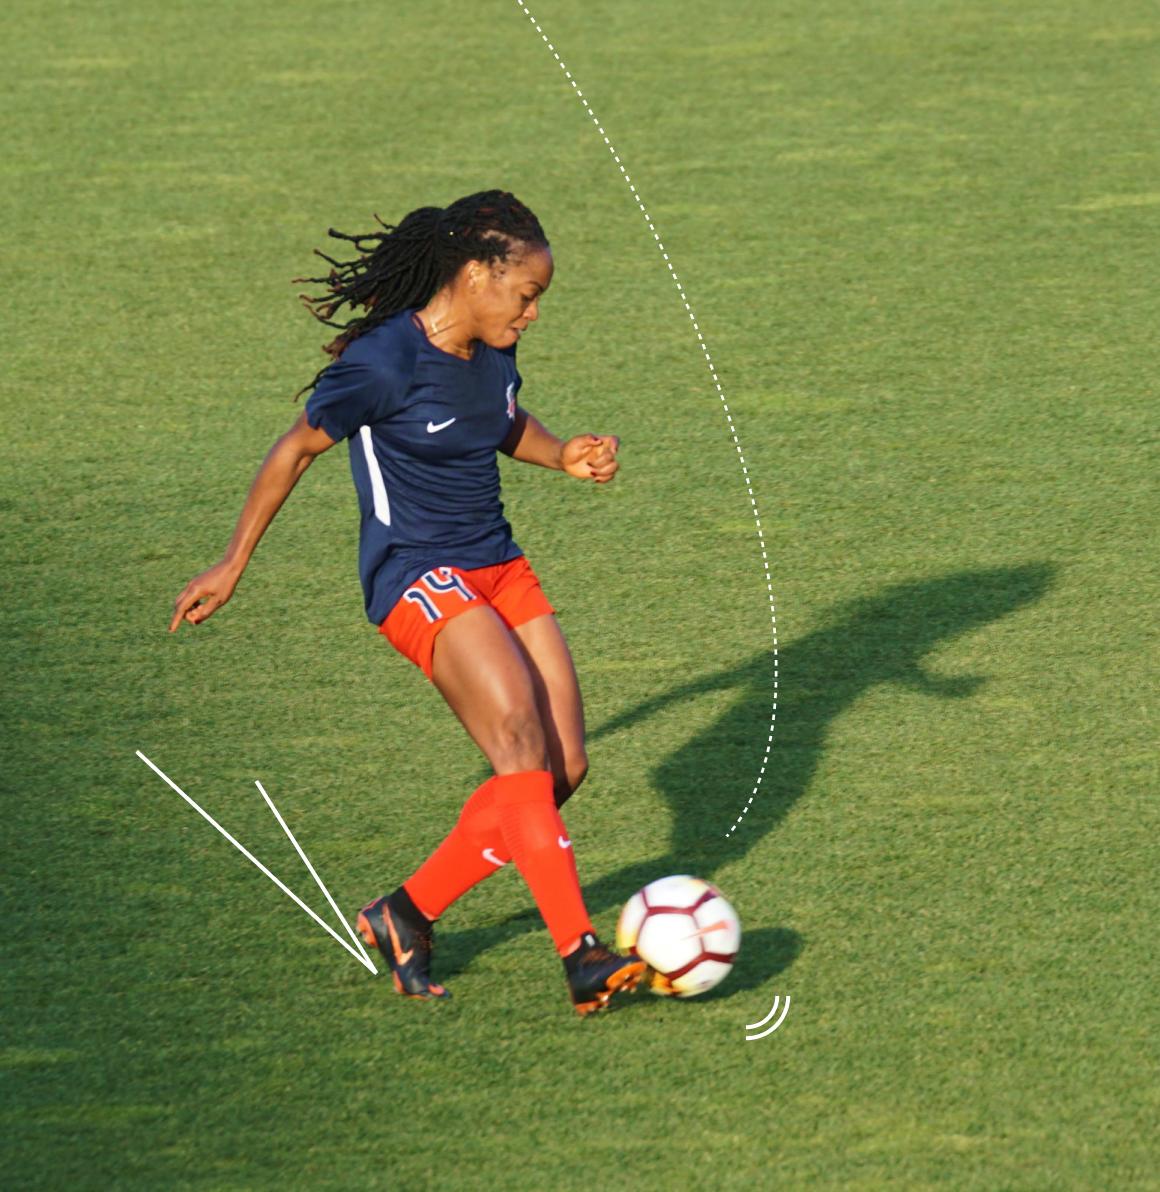 Woman kicking a football (soccer), with lines to indicate the direction of movement and the sound that would be occurring.